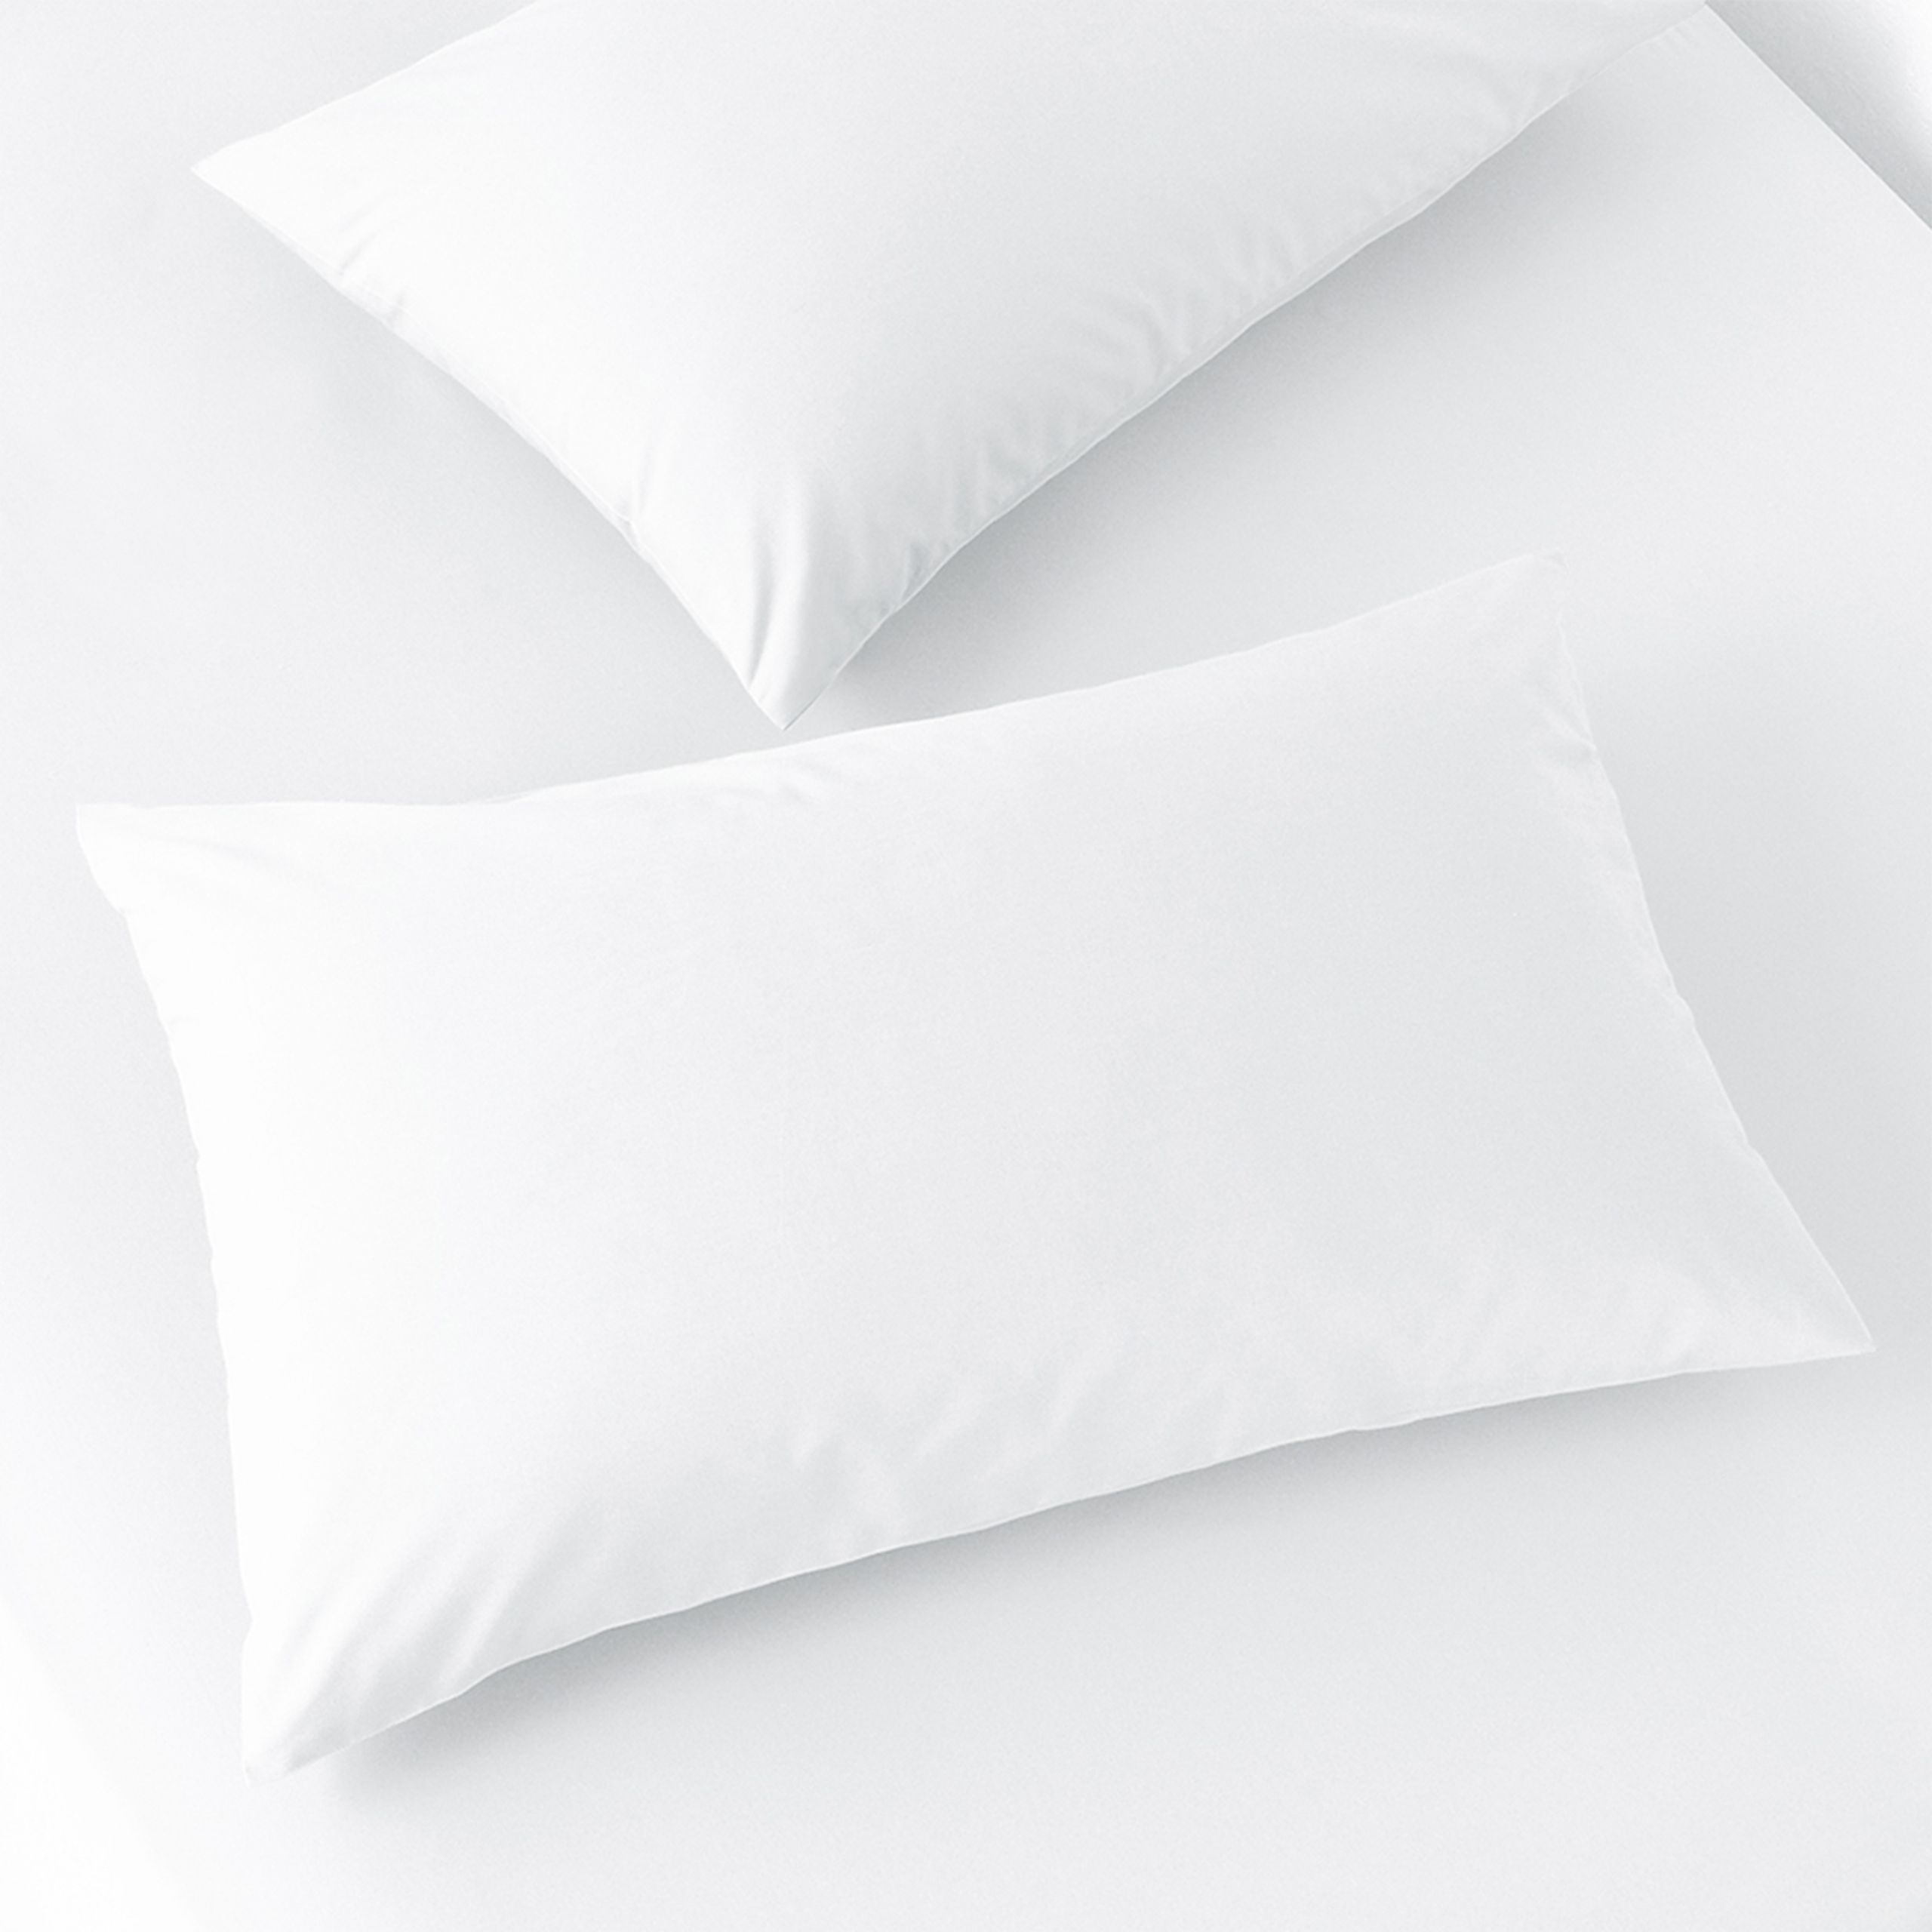 Featuring a luxurious 200-thread count bamboo blend. Complete with an envelope closure. Made of a Cotton/Bamboo blend with a 200 thread count, making this pillowcase set ultra-soft to the touch. Includes two housewife pillowcases measuring 50 x 75cm (20